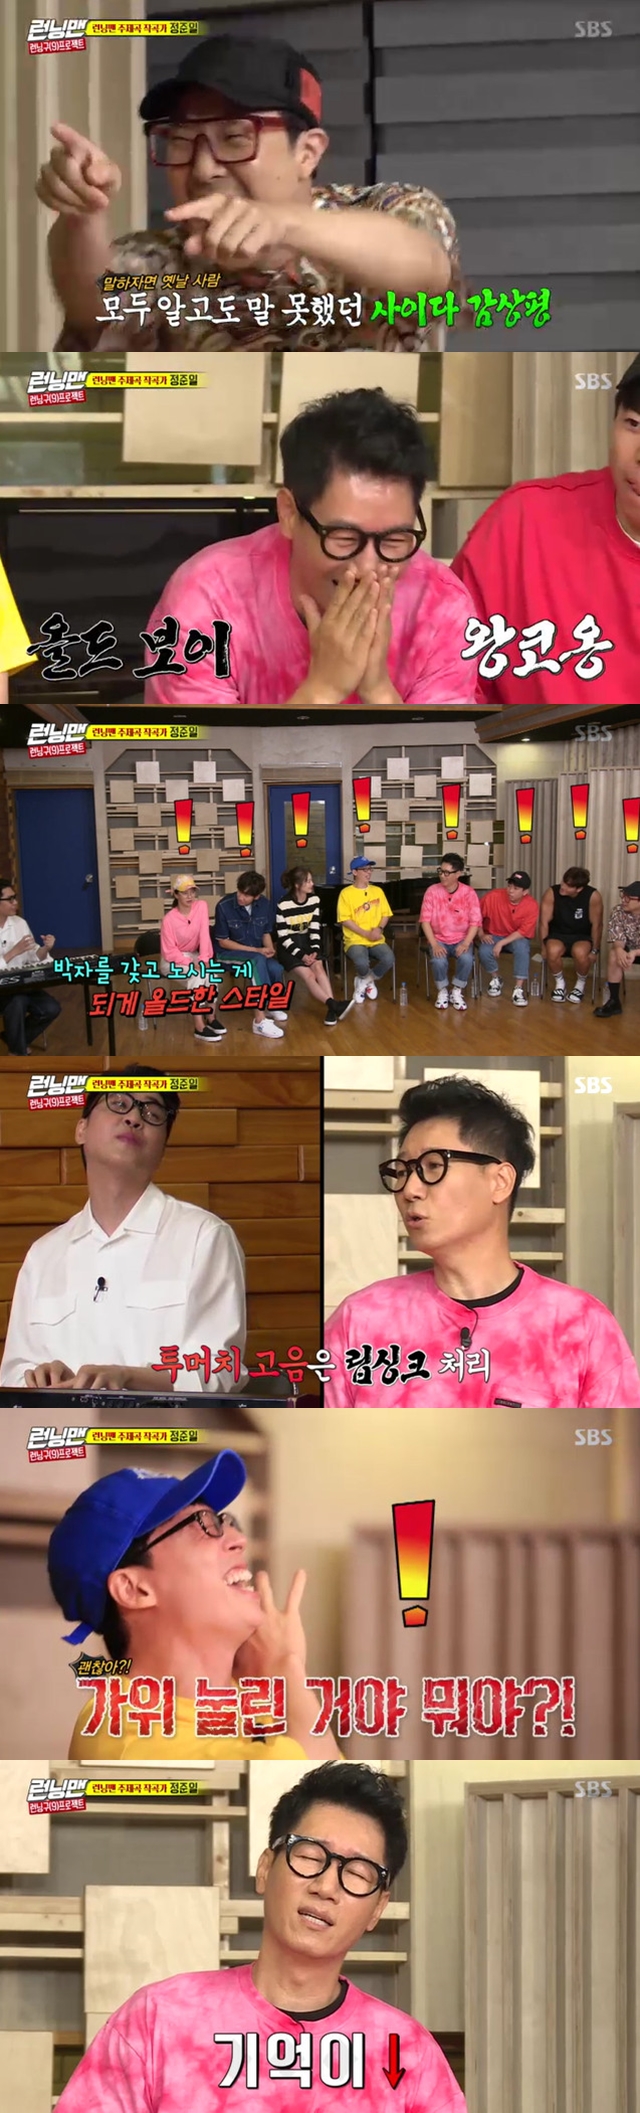 Jin Joon-Il gave a cider review to Ji Suk-jins song.Musician Jeong Joon-Il appeared on SBS Running Man on August 4 as a composer of the Running Man theme song.Jeong Joon-Il, who is usually a fan of Running Man, was cheered by the members who said that he accepted the composer proposal in New York, USA.On this day, Jeong Joon-Il ordered Kim Bum-soo to want to see to check the singing skills of the members.Among them, Ji Suk-jin, a former original singer, showed off his first album singer-like skills; Ji Suk-jin played with notes freely.Ji Suk-jin made a self-adjustment and a two-much high-pitched lip sync to make a laugh.Jeong Joon-Il, who was listening to this, laughed at almost fainting levels.bak-beauty